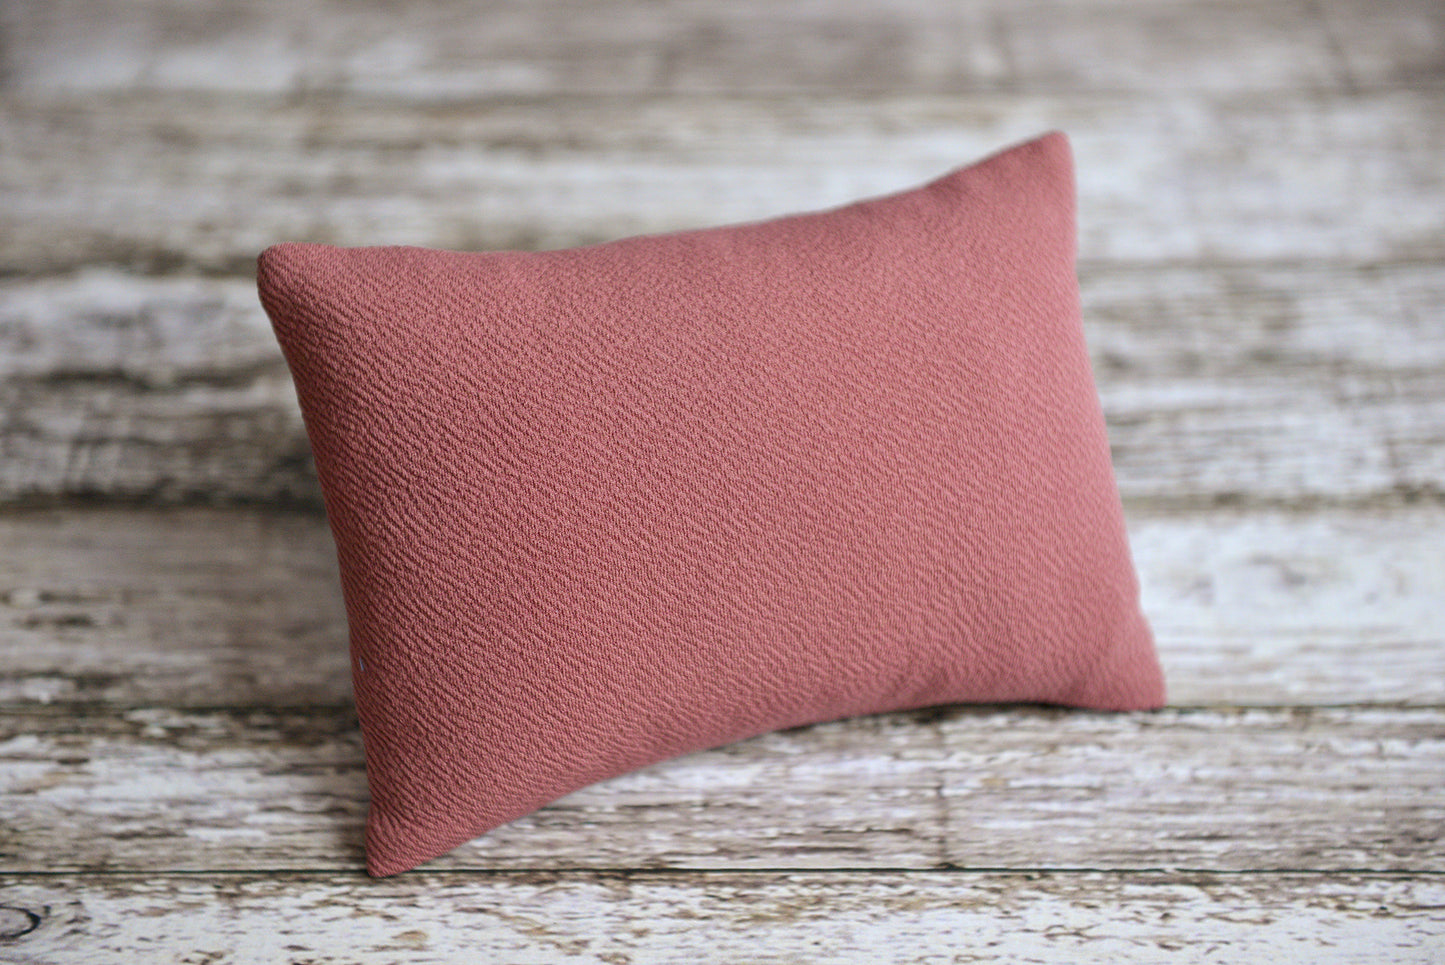 Mini Pillow with Cover - Textured - Mauve-Newborn Photography Props